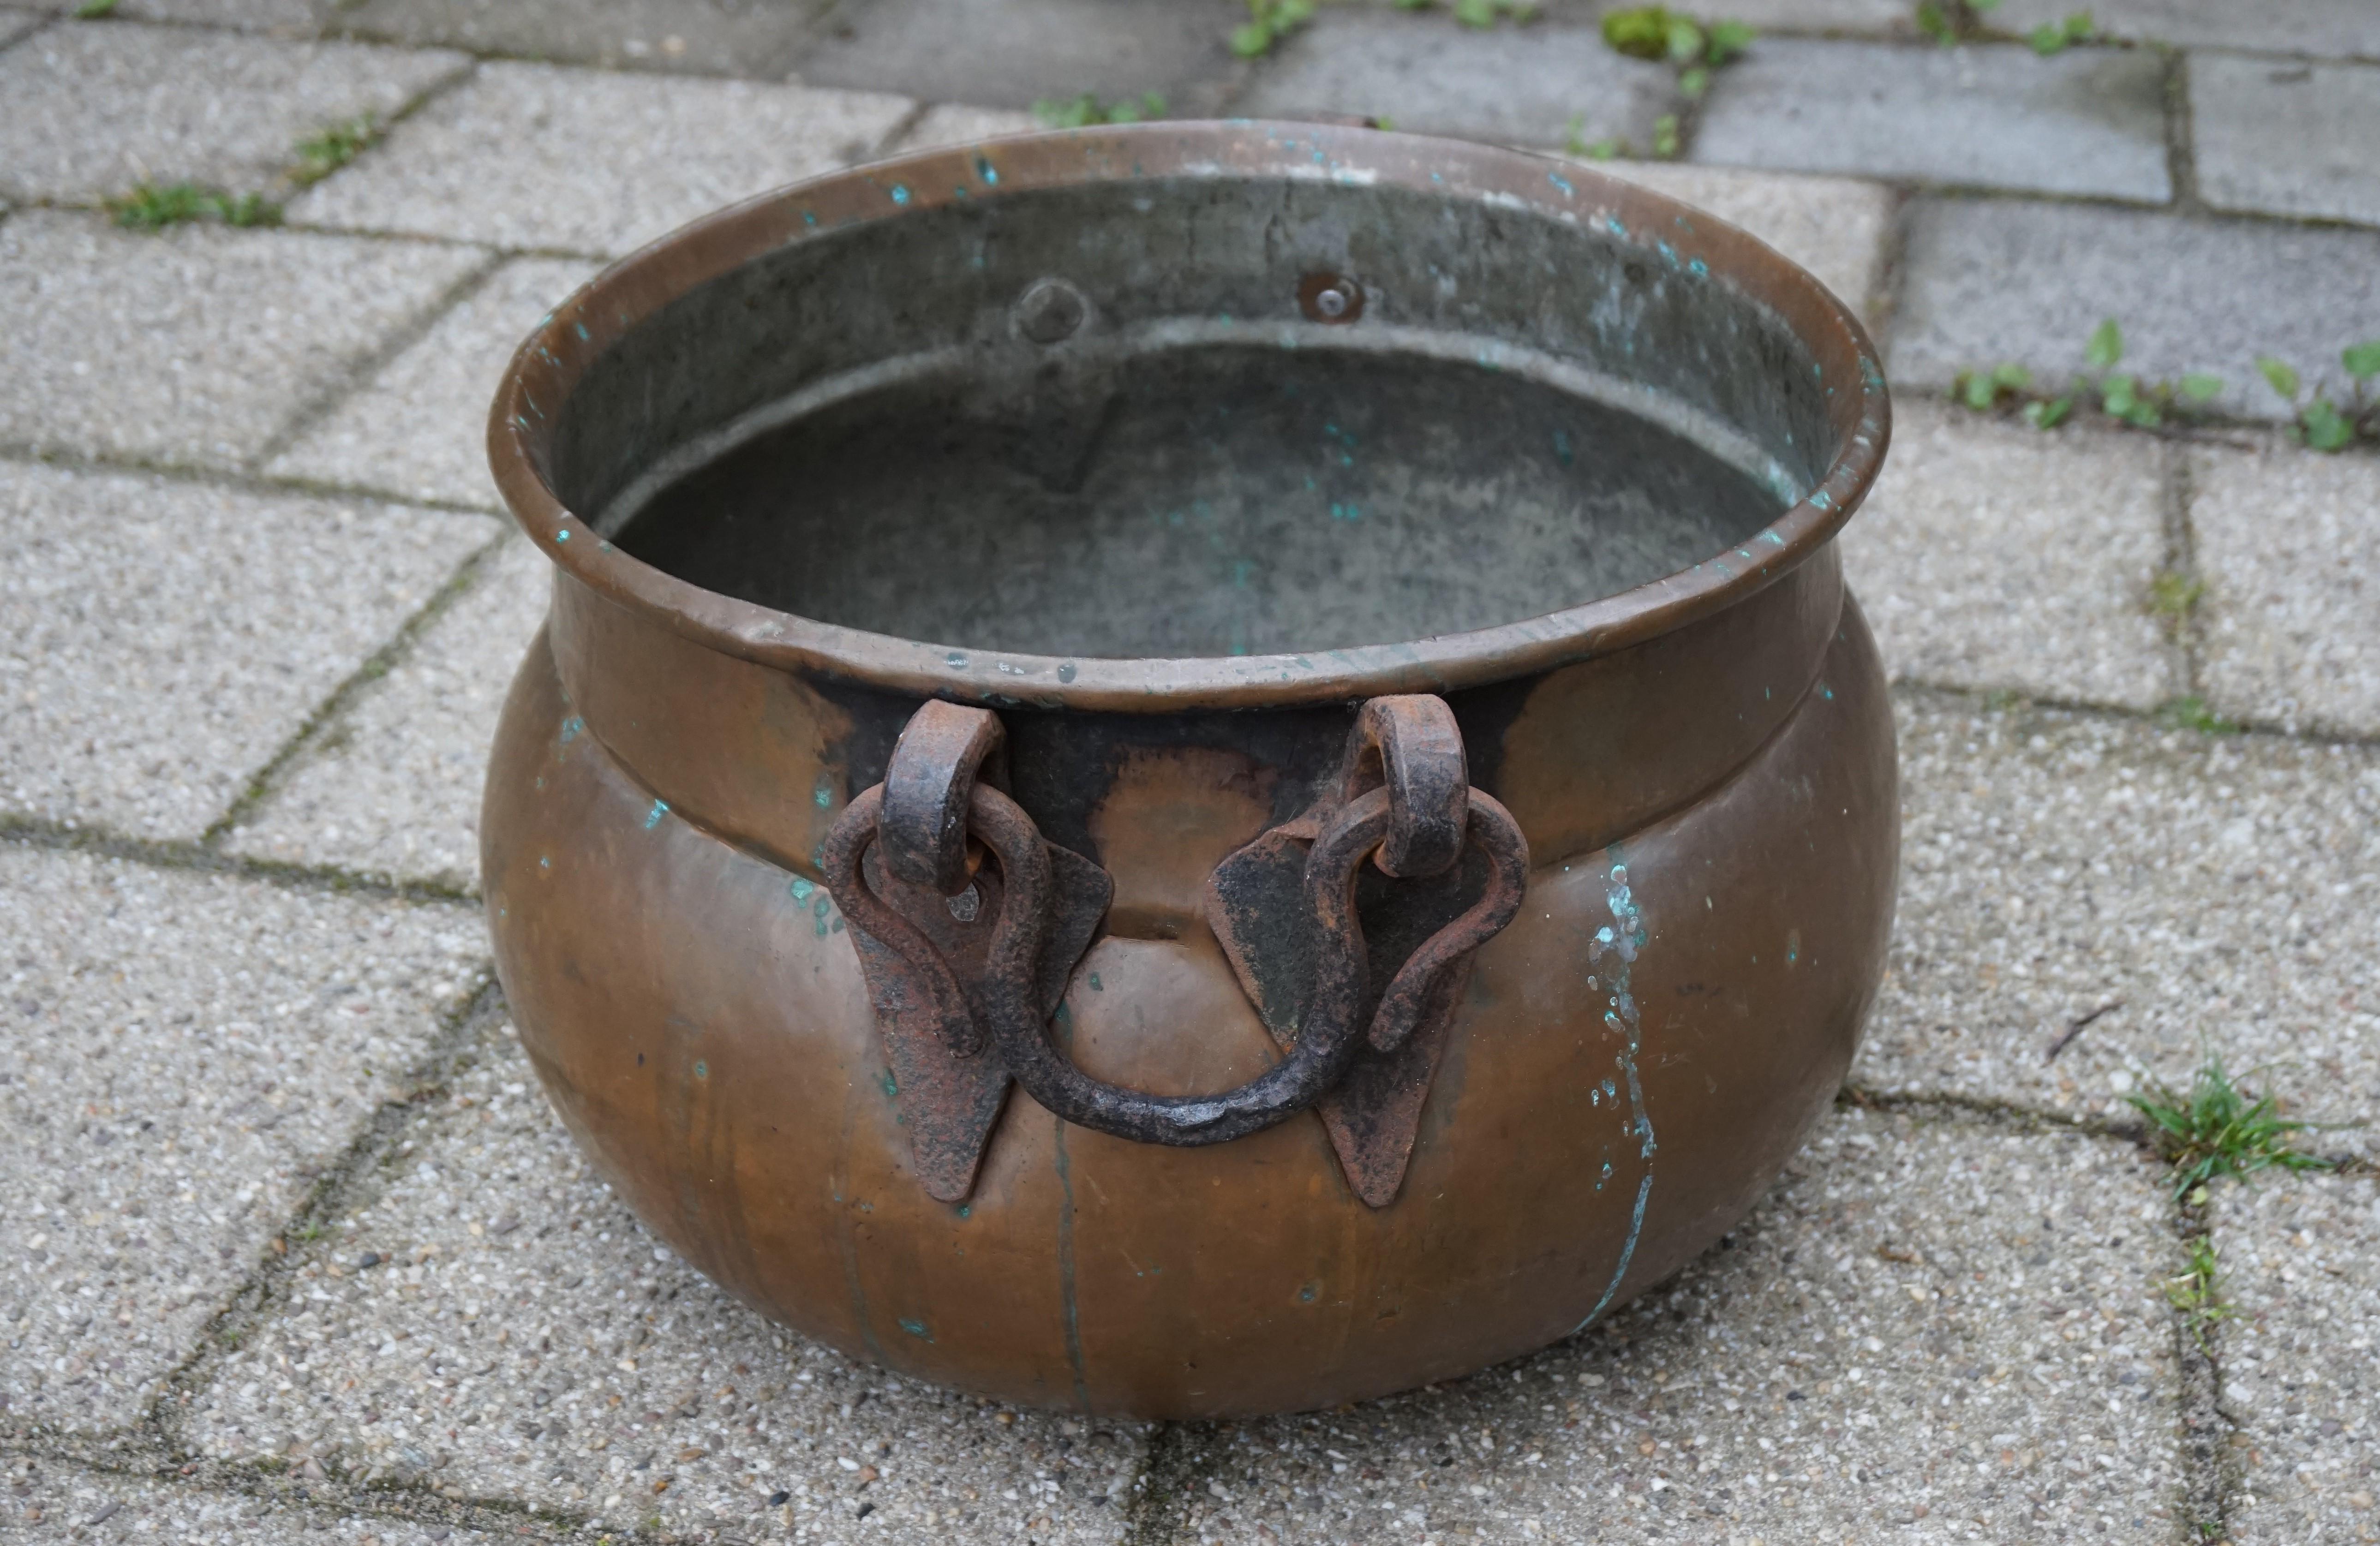 Early 1800s and highly stylish bucket.

Only if you were a very wealthy person in Holland in the early 1800s, would you be able to afford such a large, impressive and all-handcrafted bucket. This stunning and tactile antique would be placed on or